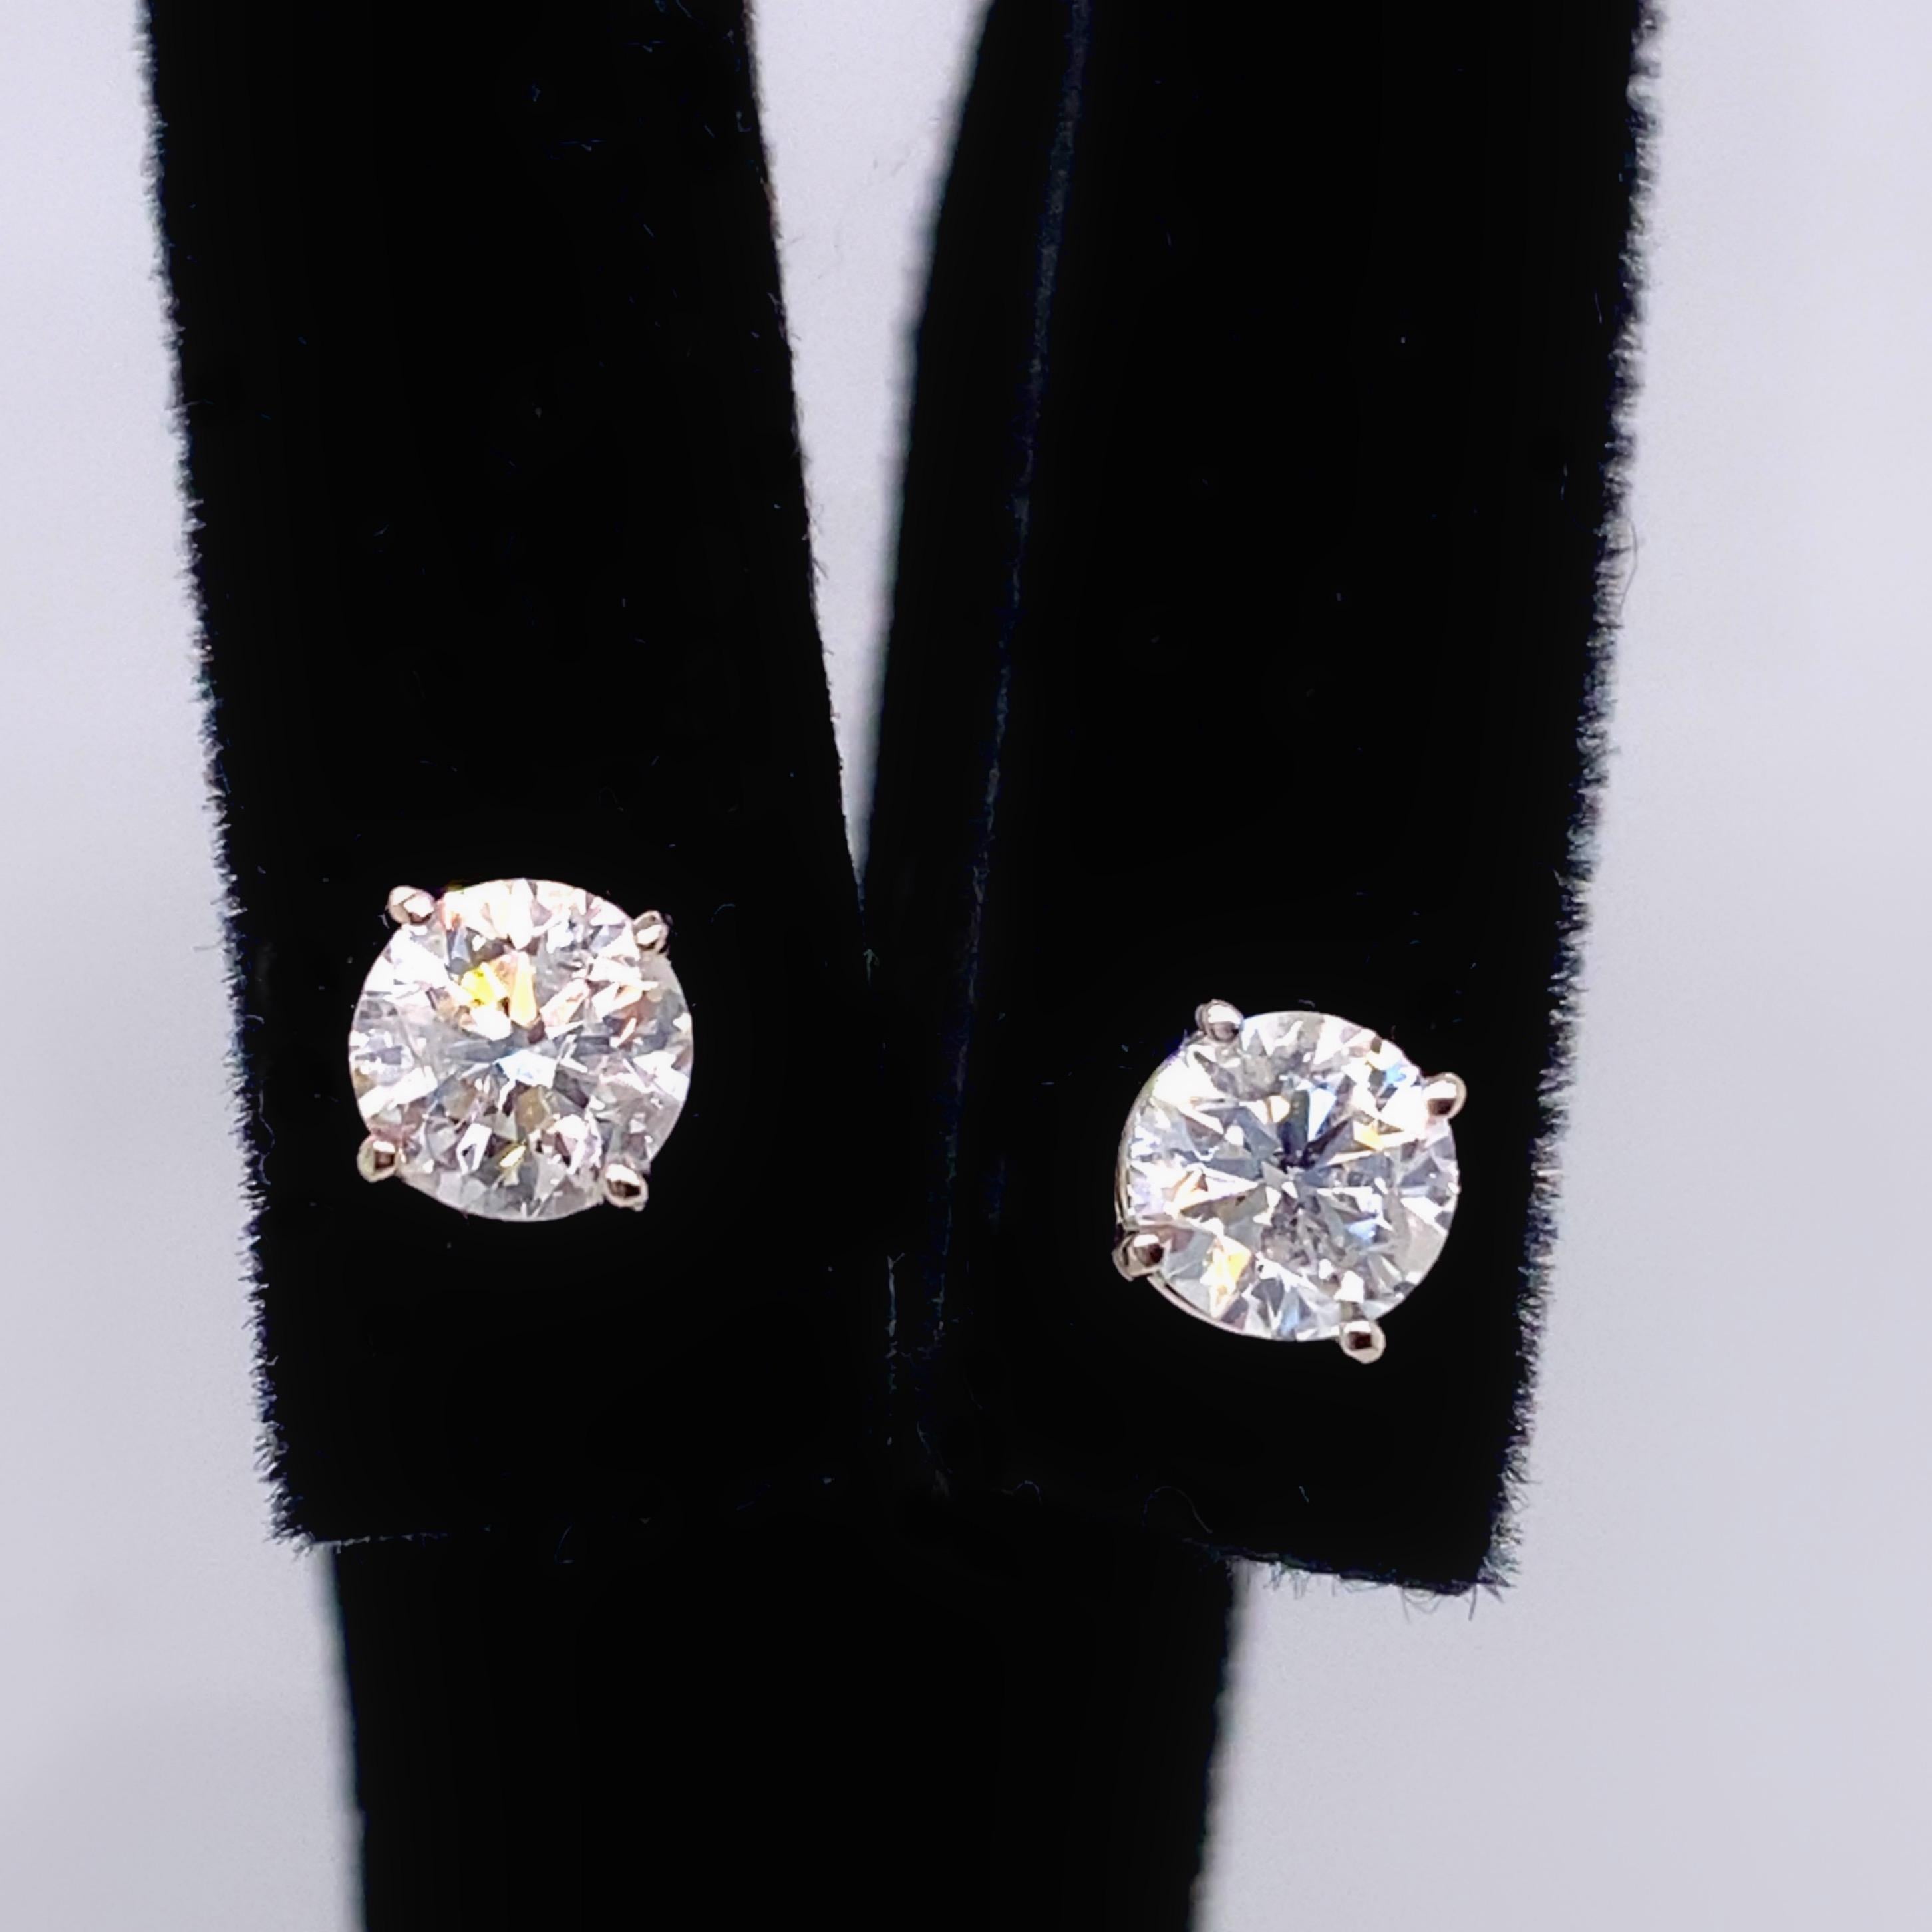 Round Solitaire Diamond Stud Earrings 1.82 Tcw Set in 14kt White Gold For Sale 4